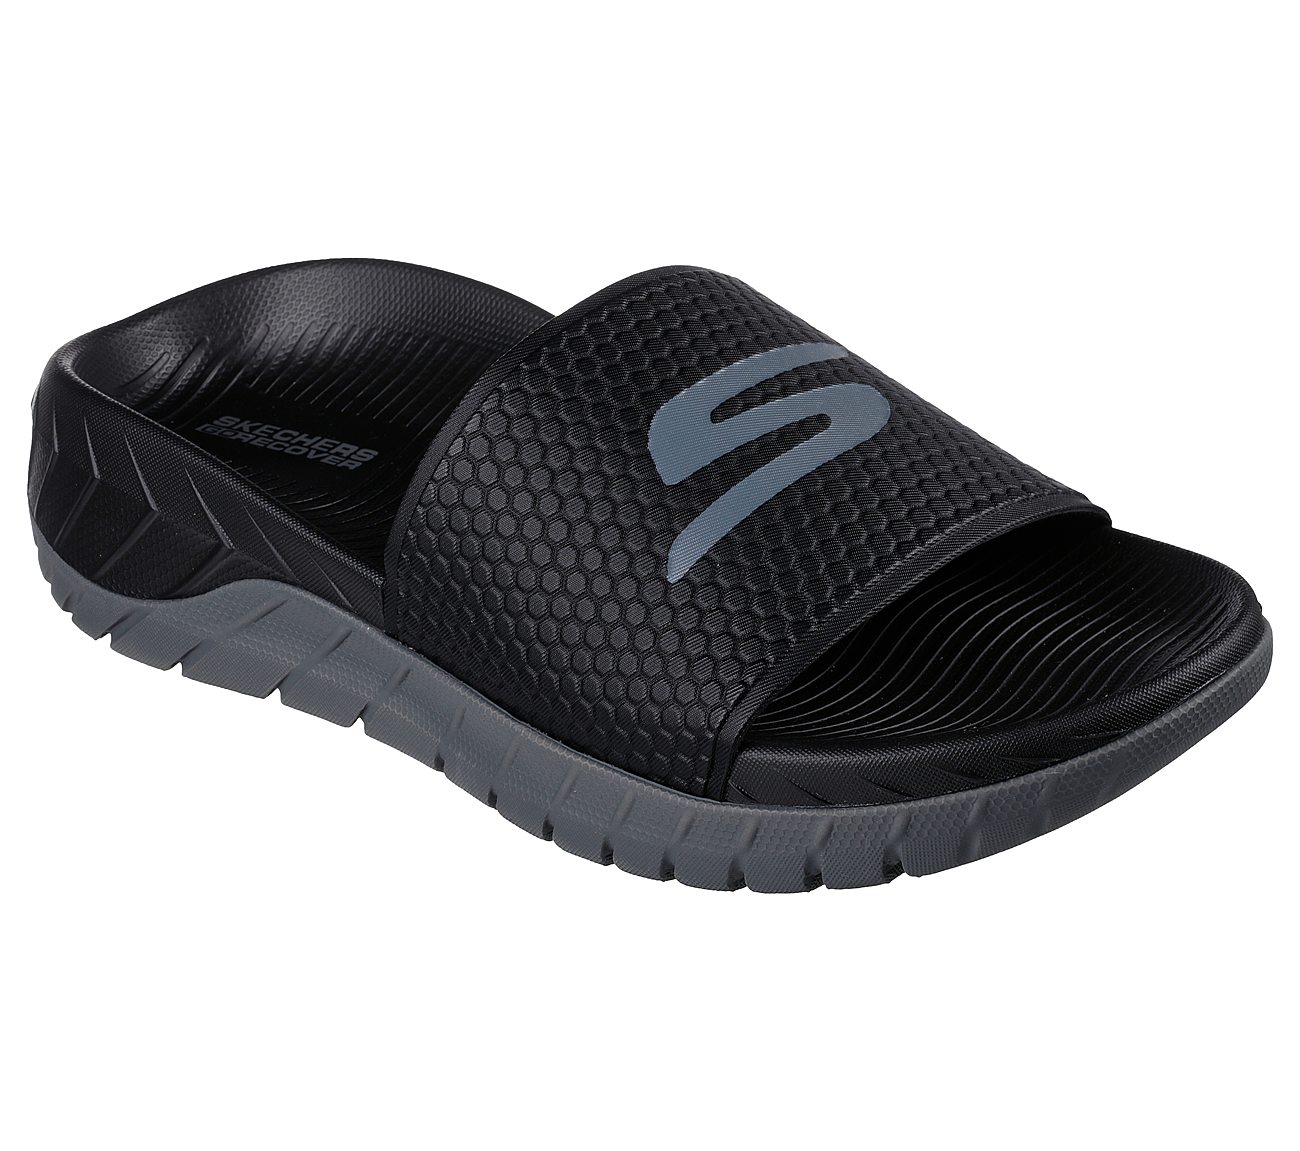 GO RECOVER SANDAL, BLACK/CHARCOAL Footwear Right View